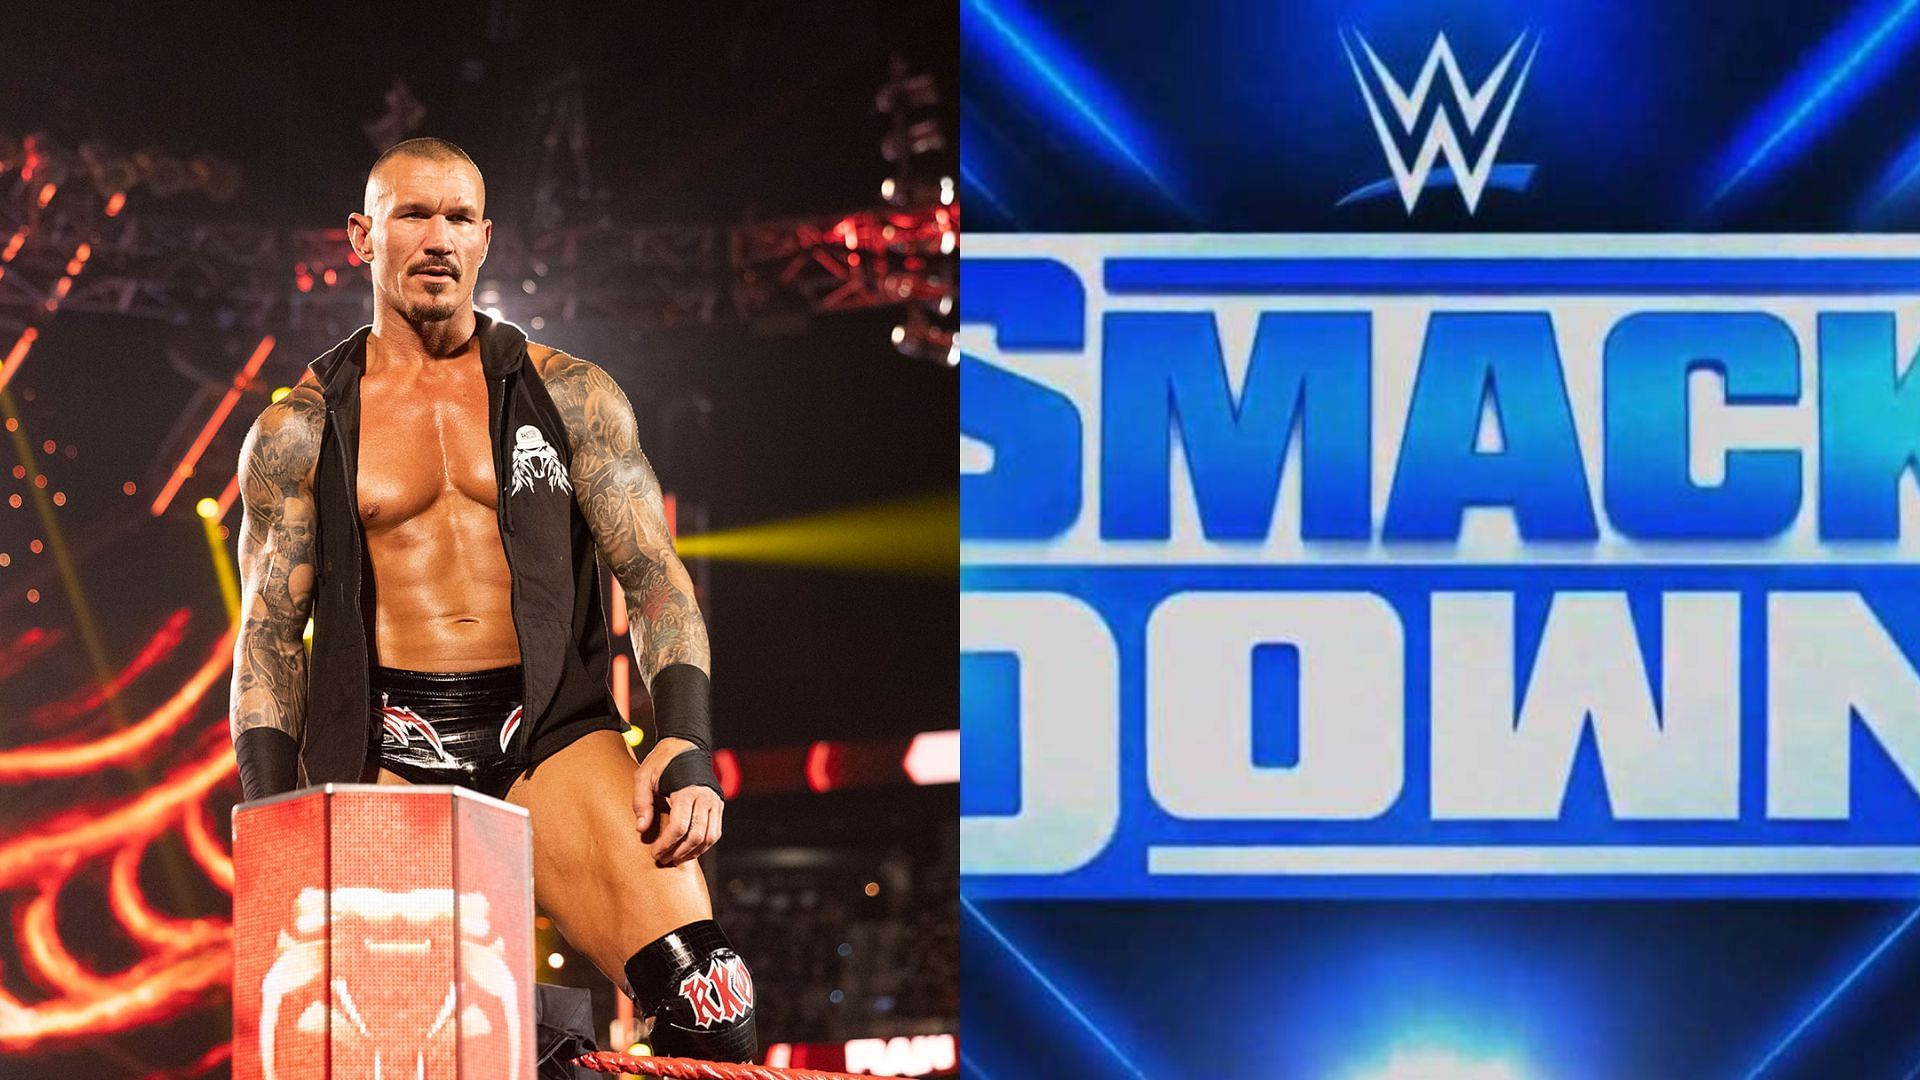 Randy Orton chose to sign with WWE SmackDown